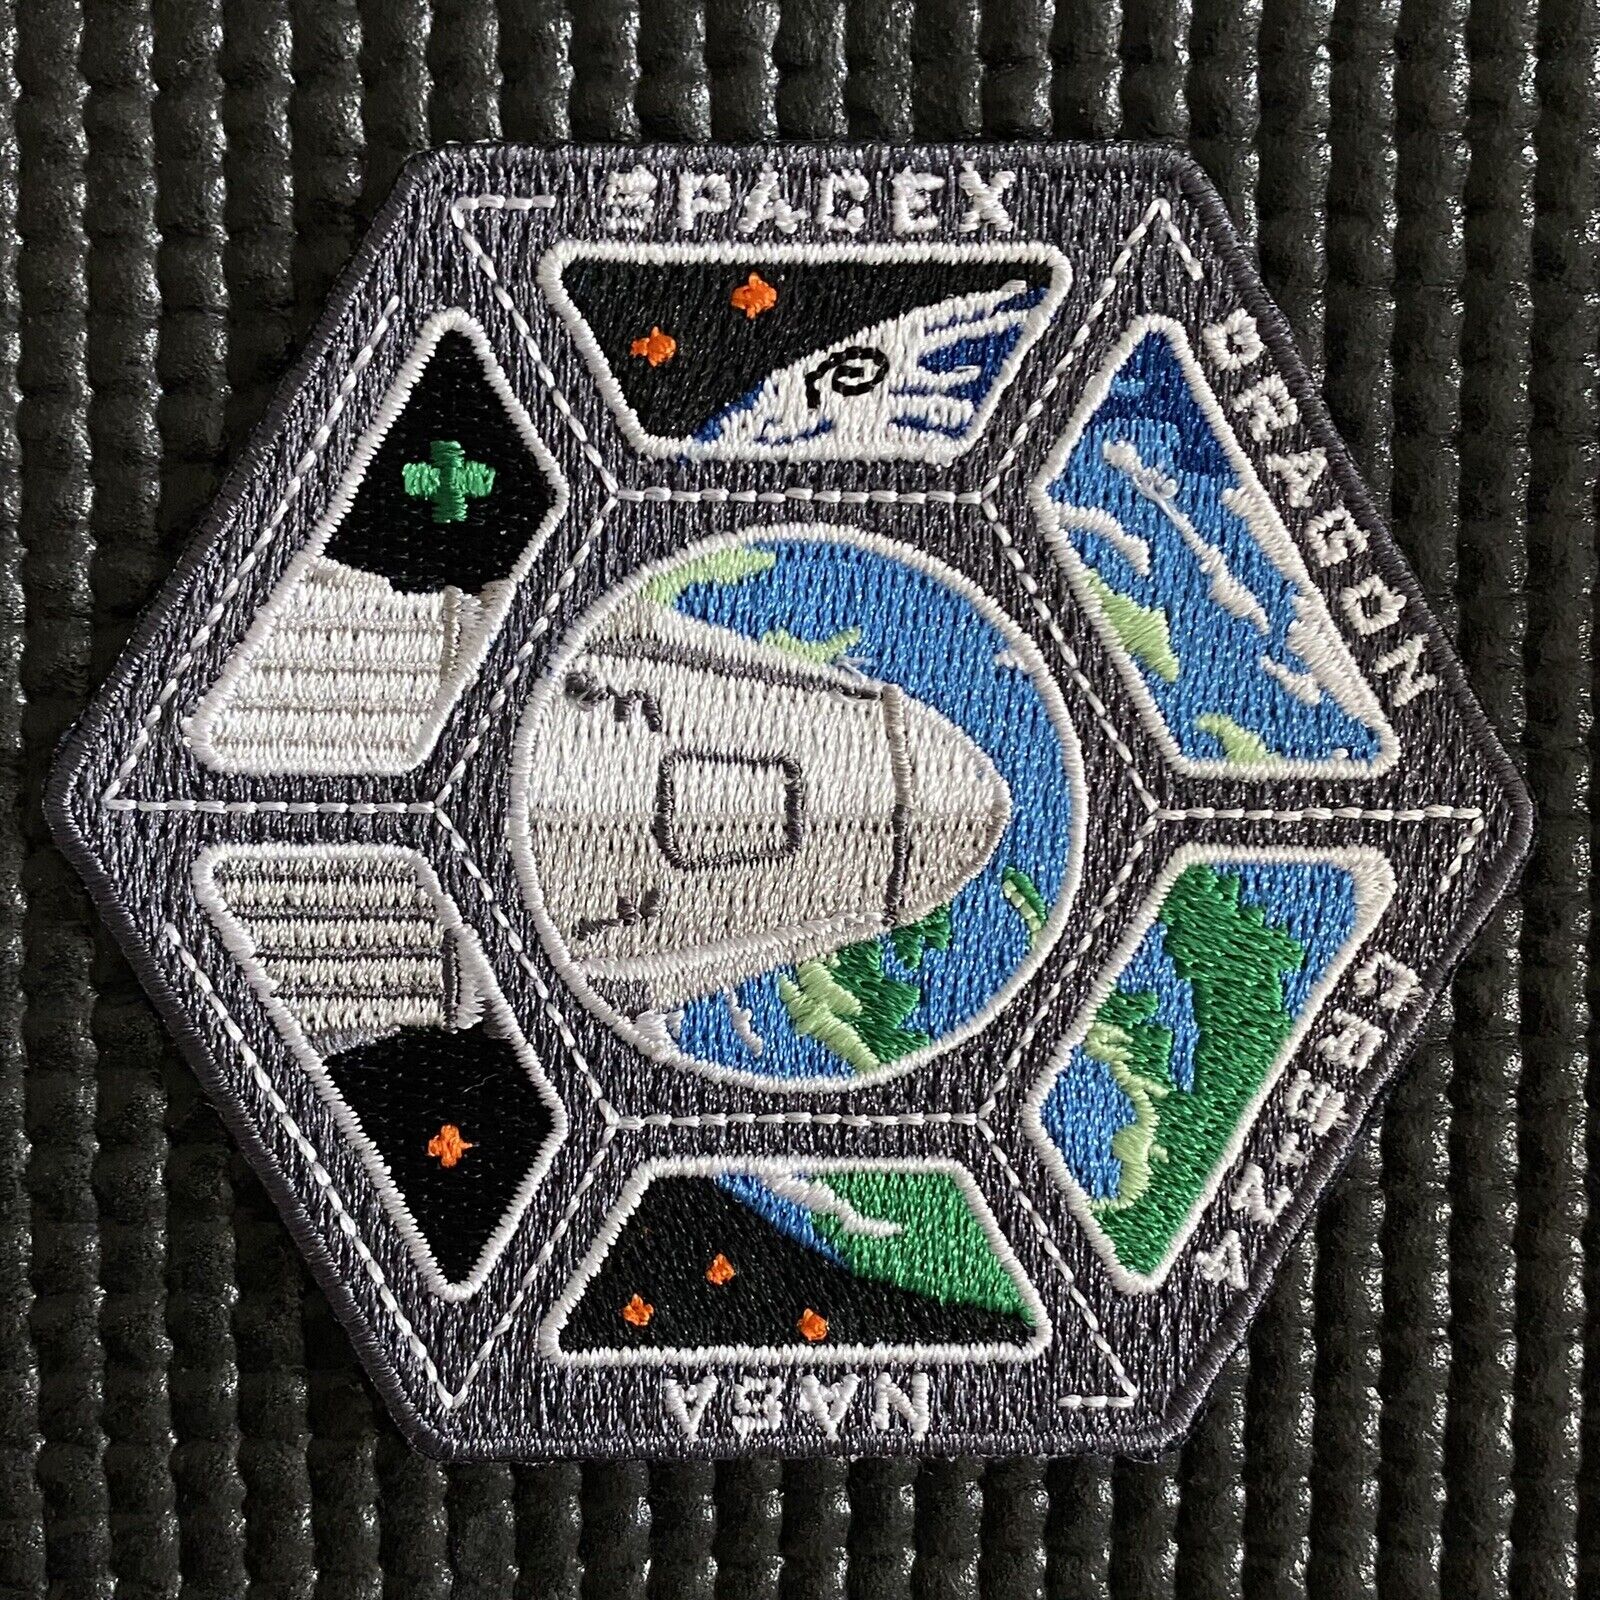 NASA SPACEX- CRS 24 INTERNATIONAL SPACE STATION RESUPPLY MISSION PATCH - 3.5”